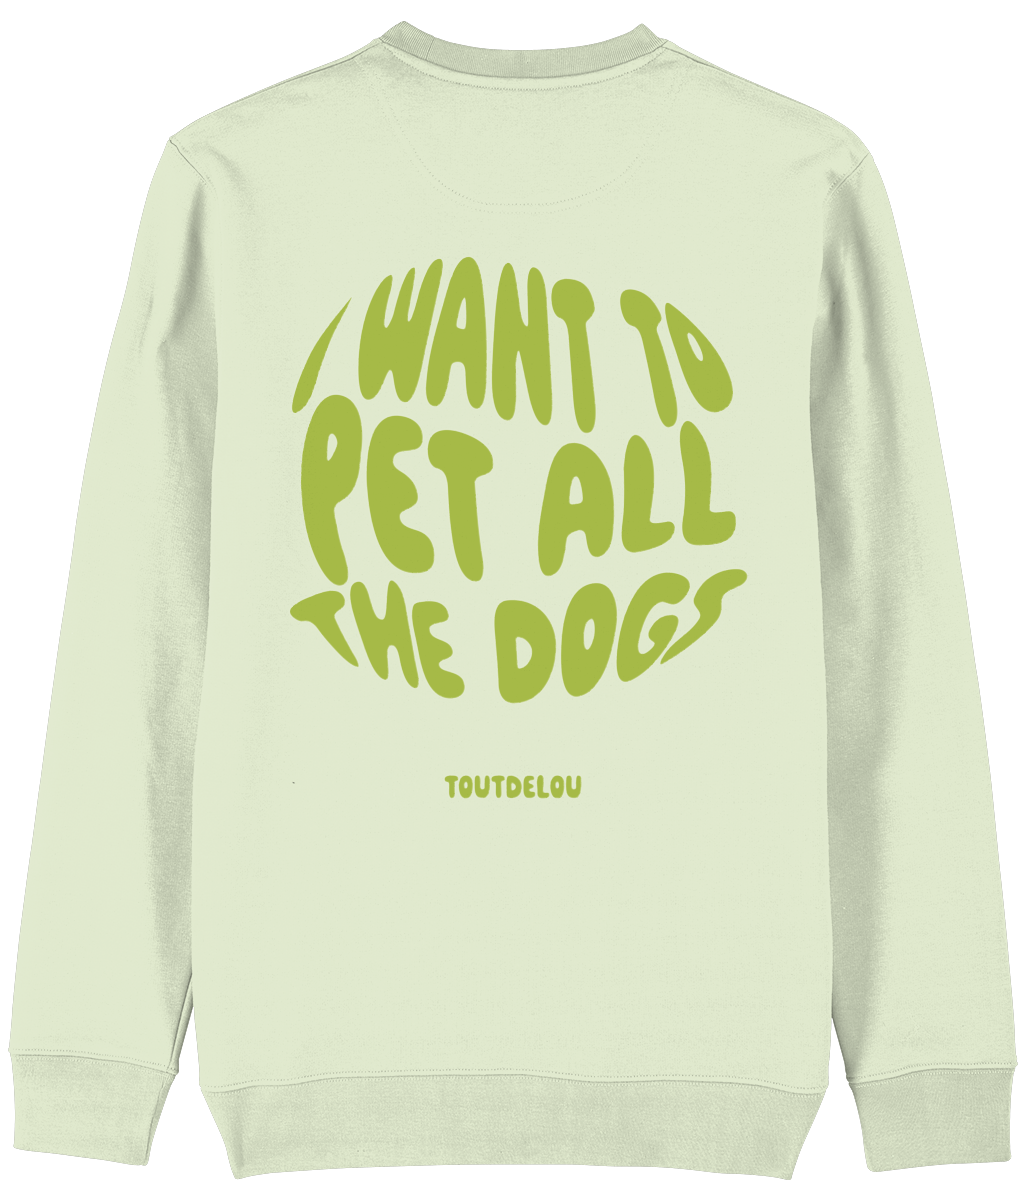 Sweater - pet all the dogs - green - print on front and back